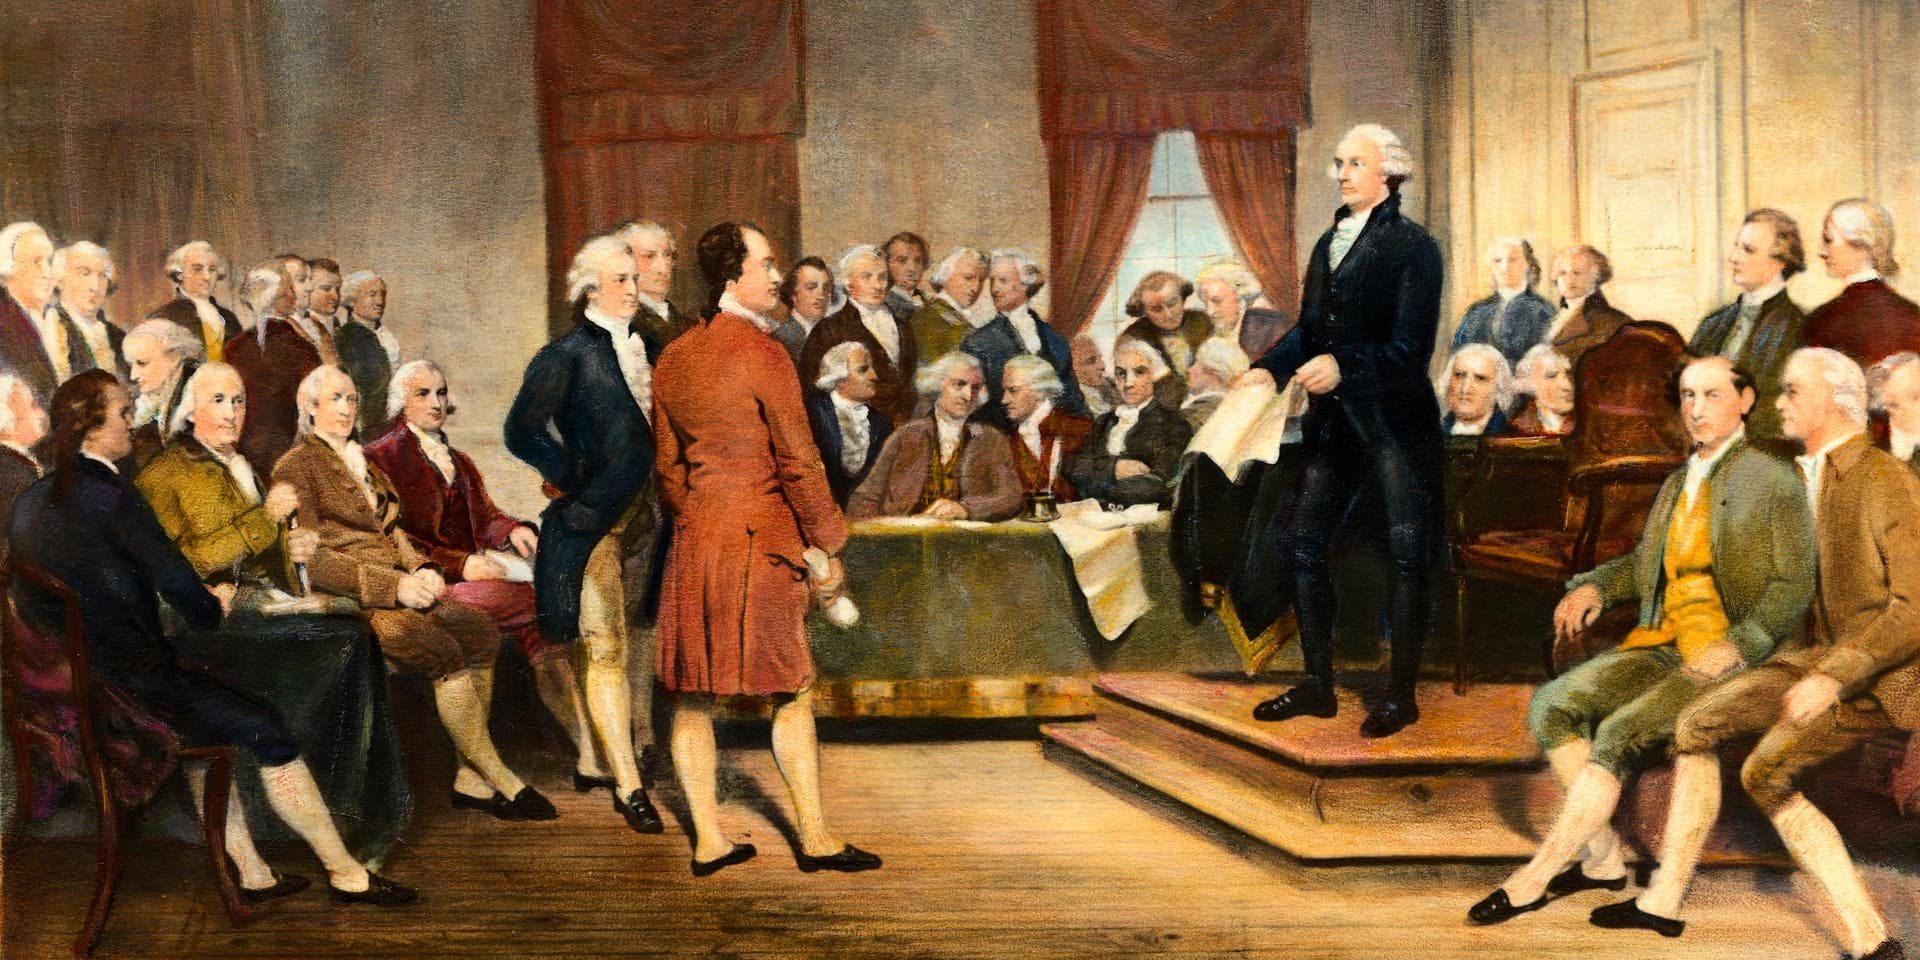 Signing of the United States Constitution(Original Caption) The signing of the United States Constitution in 1787. Undated painting by Stearns.